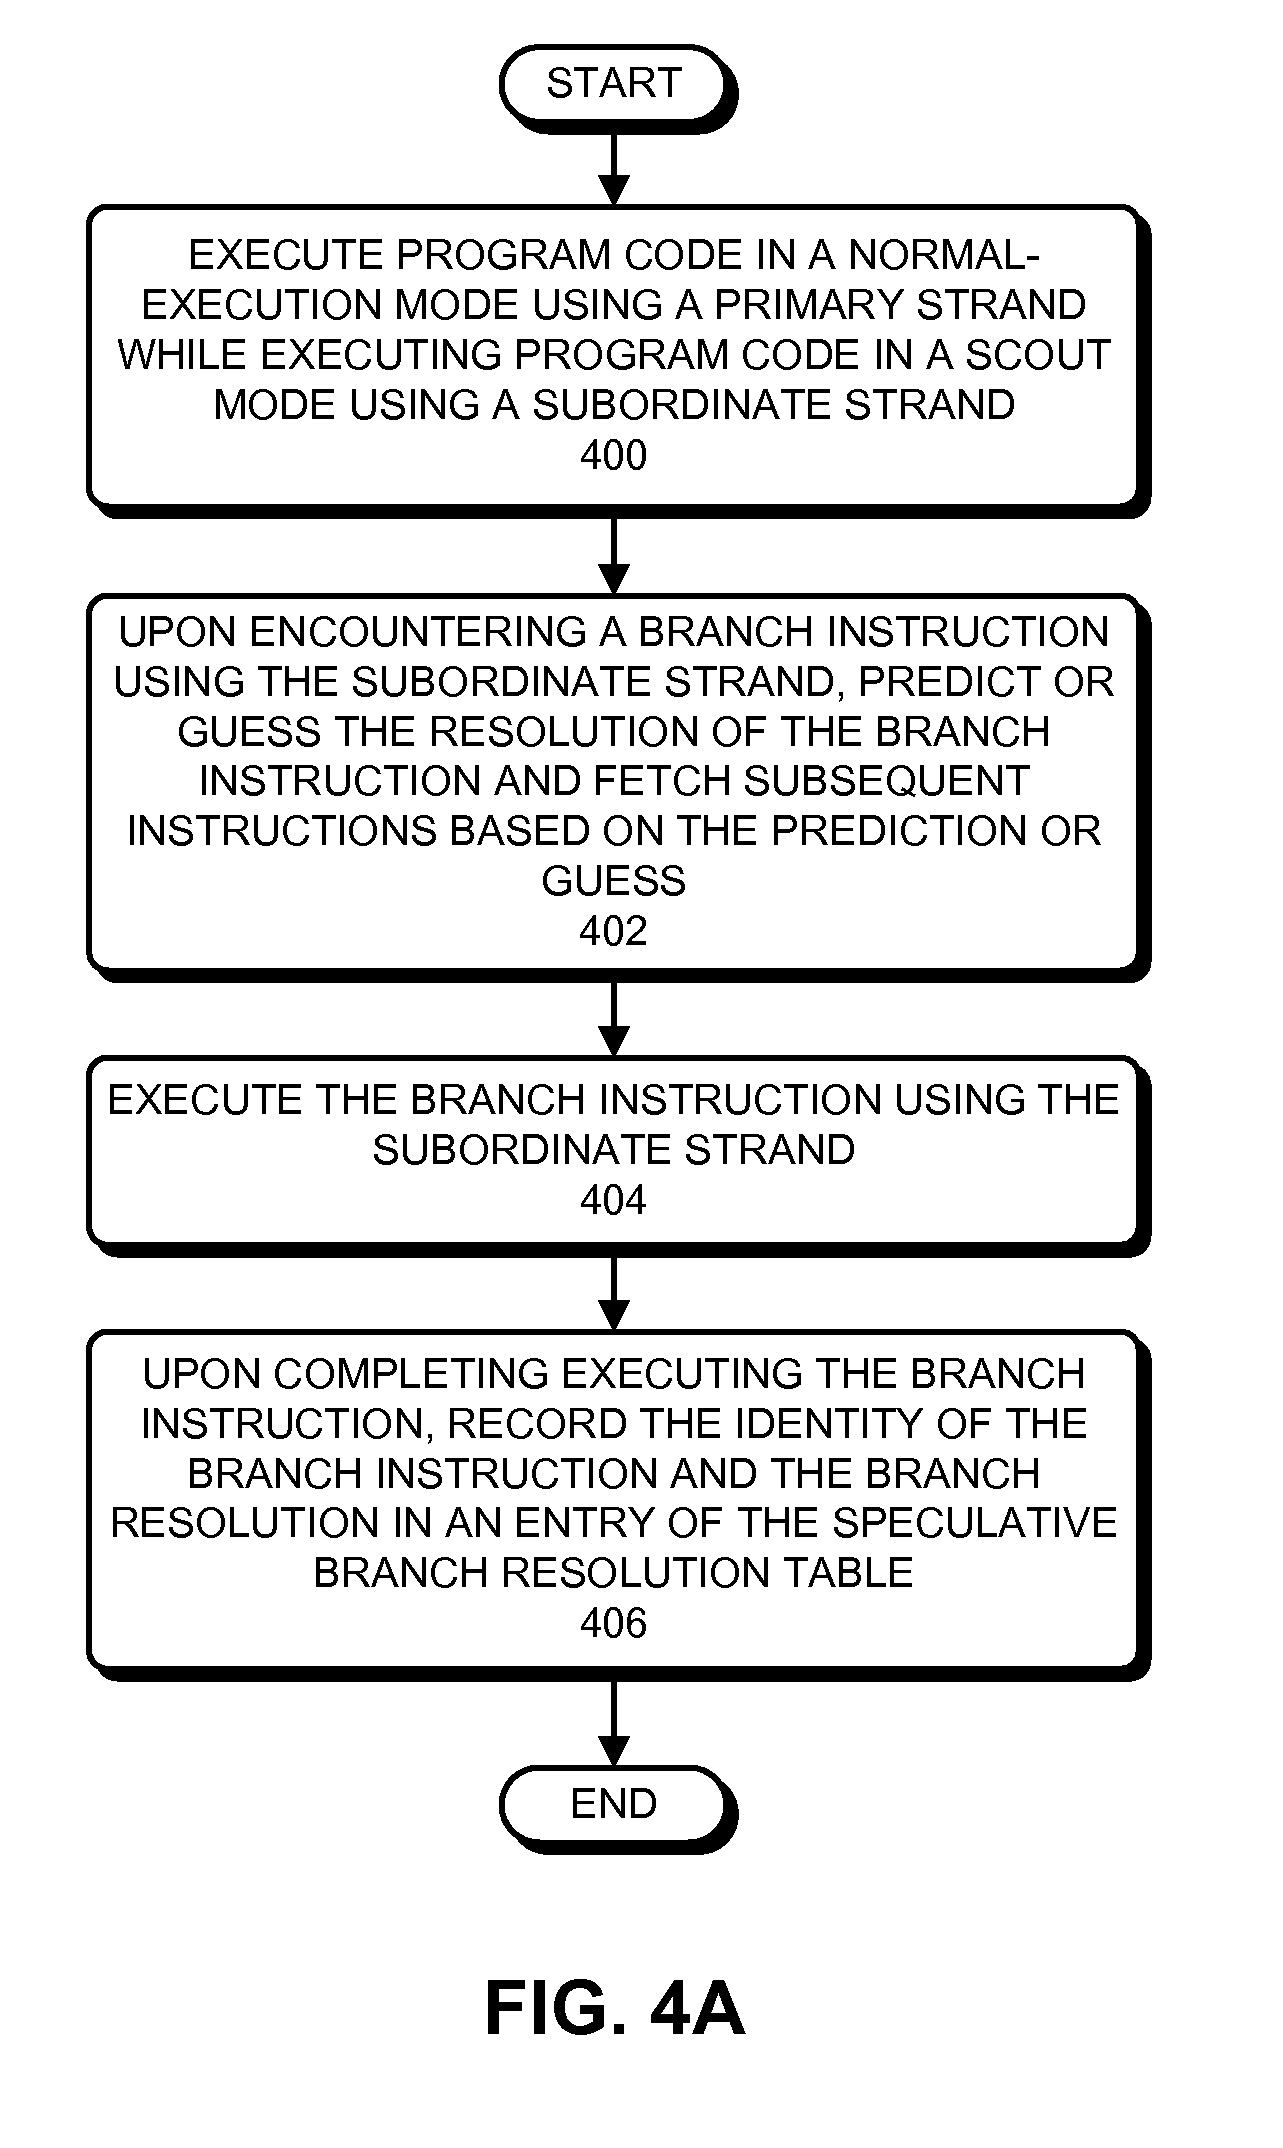 Recovering a subordinate strand from a branch misprediction using state information from a primary strand